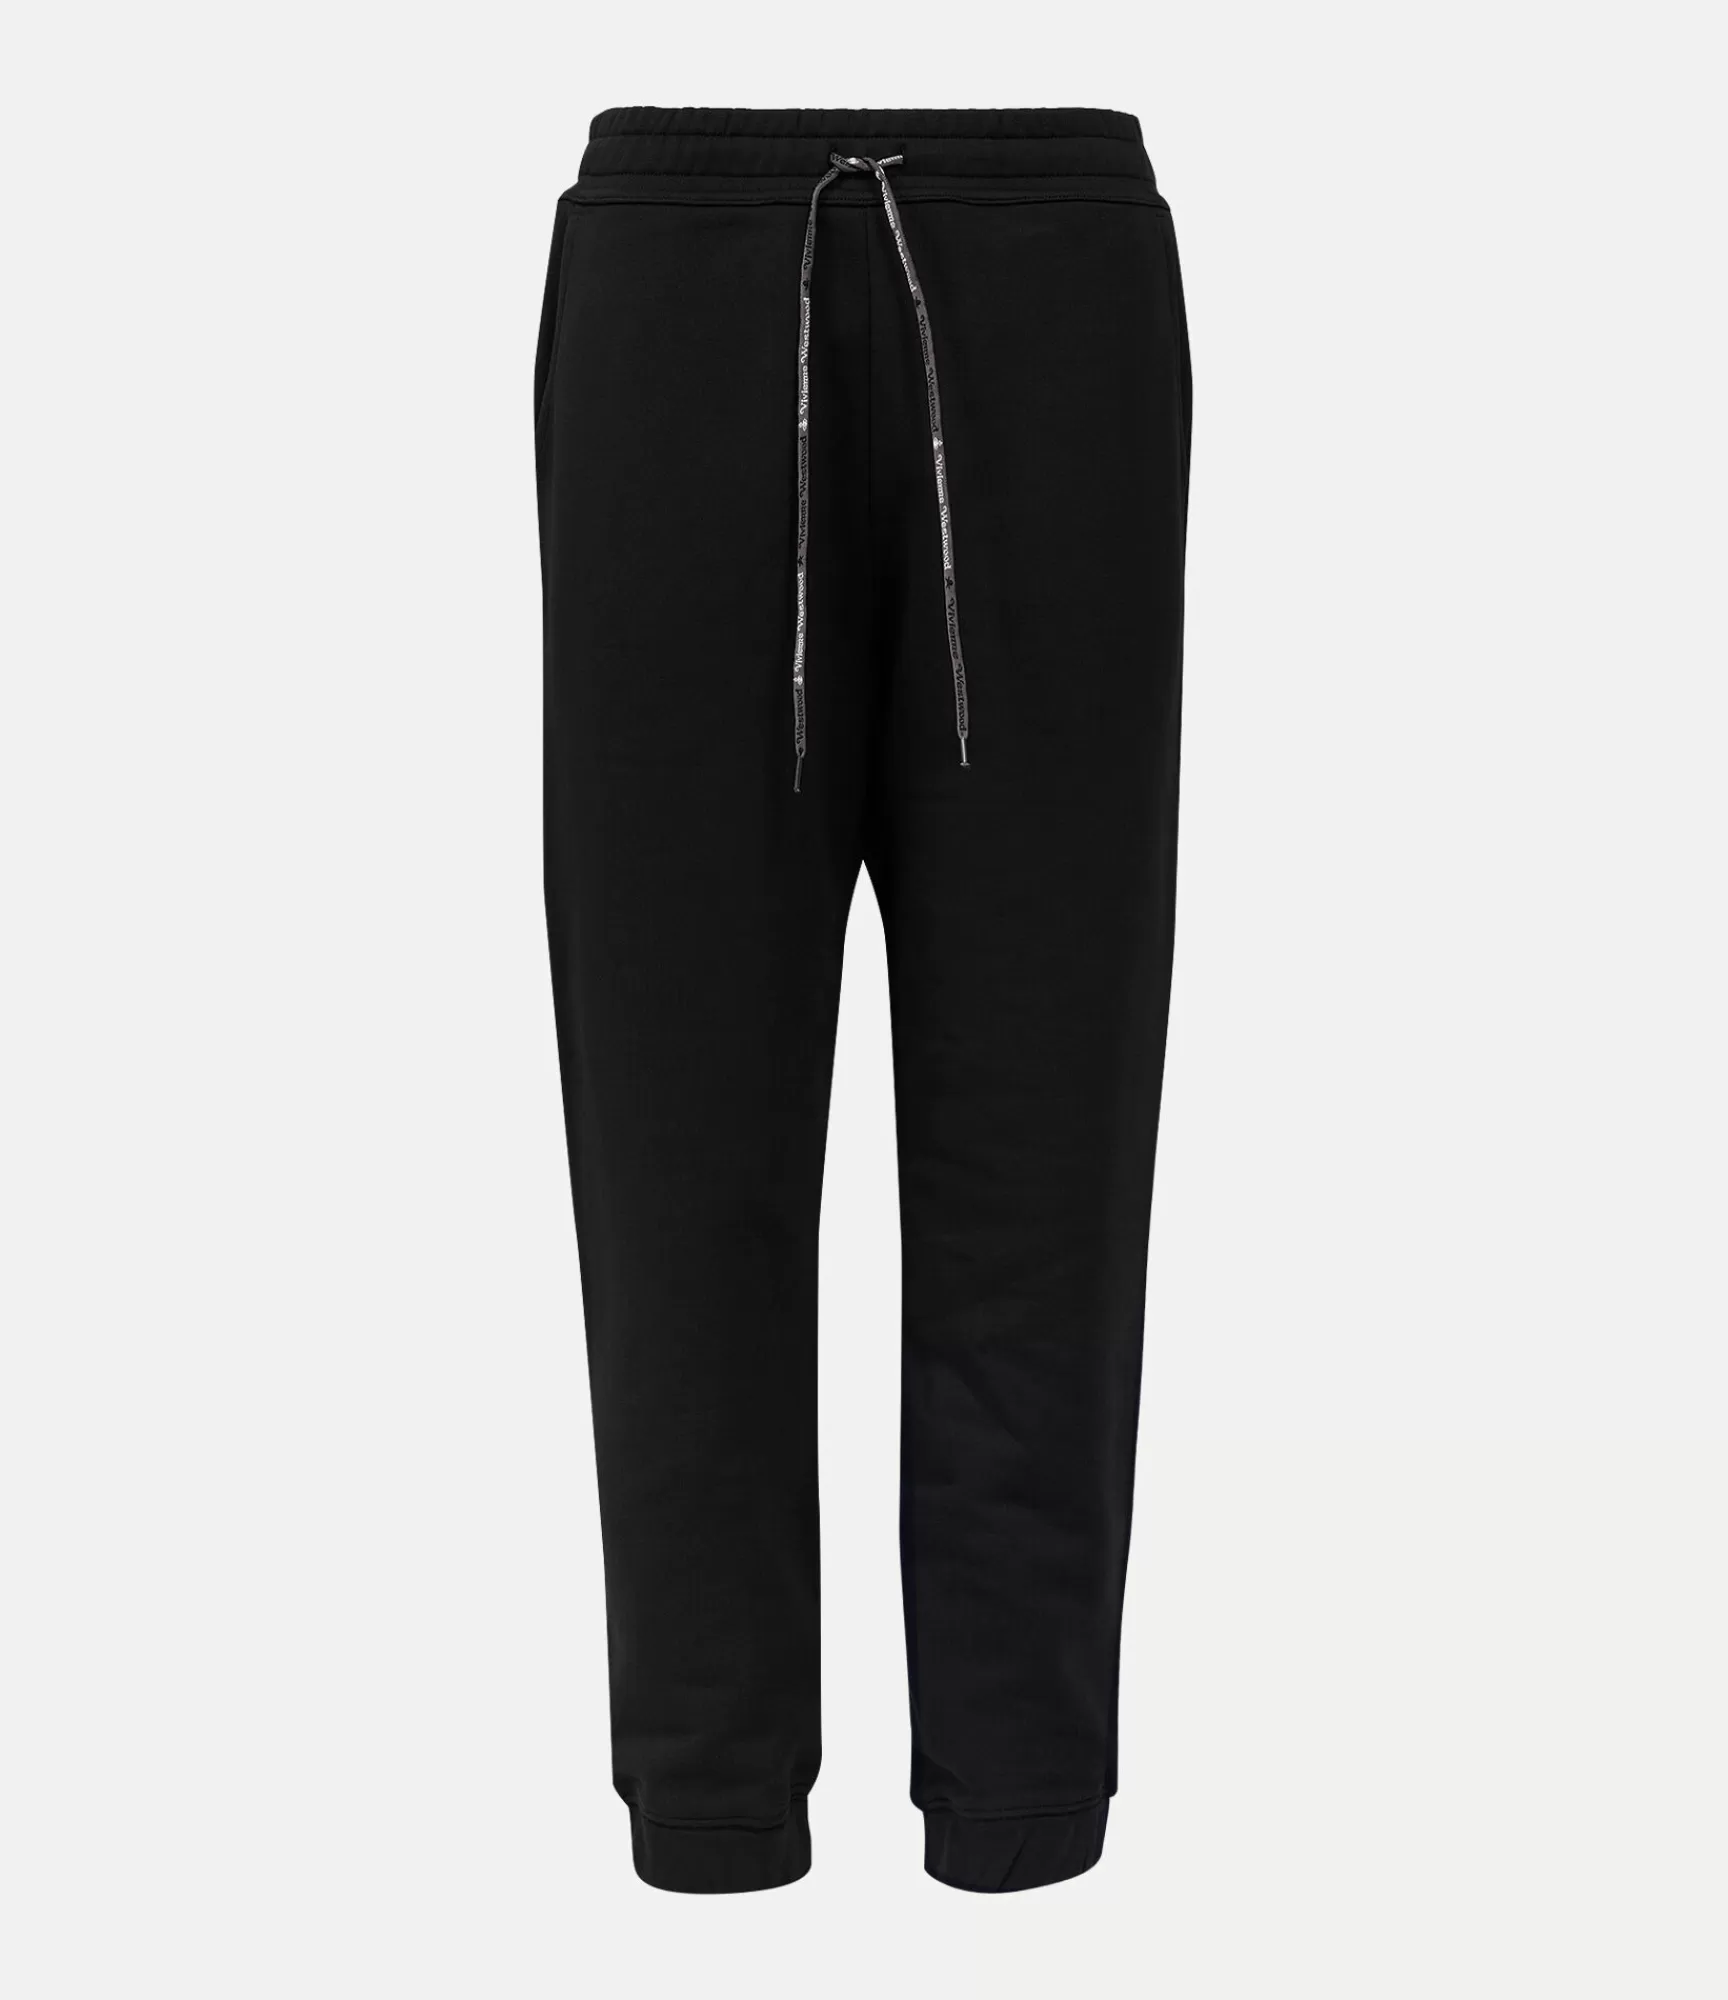 Vivienne Westwood Trousers and Shorts*Spray orb classic sweatpants Black